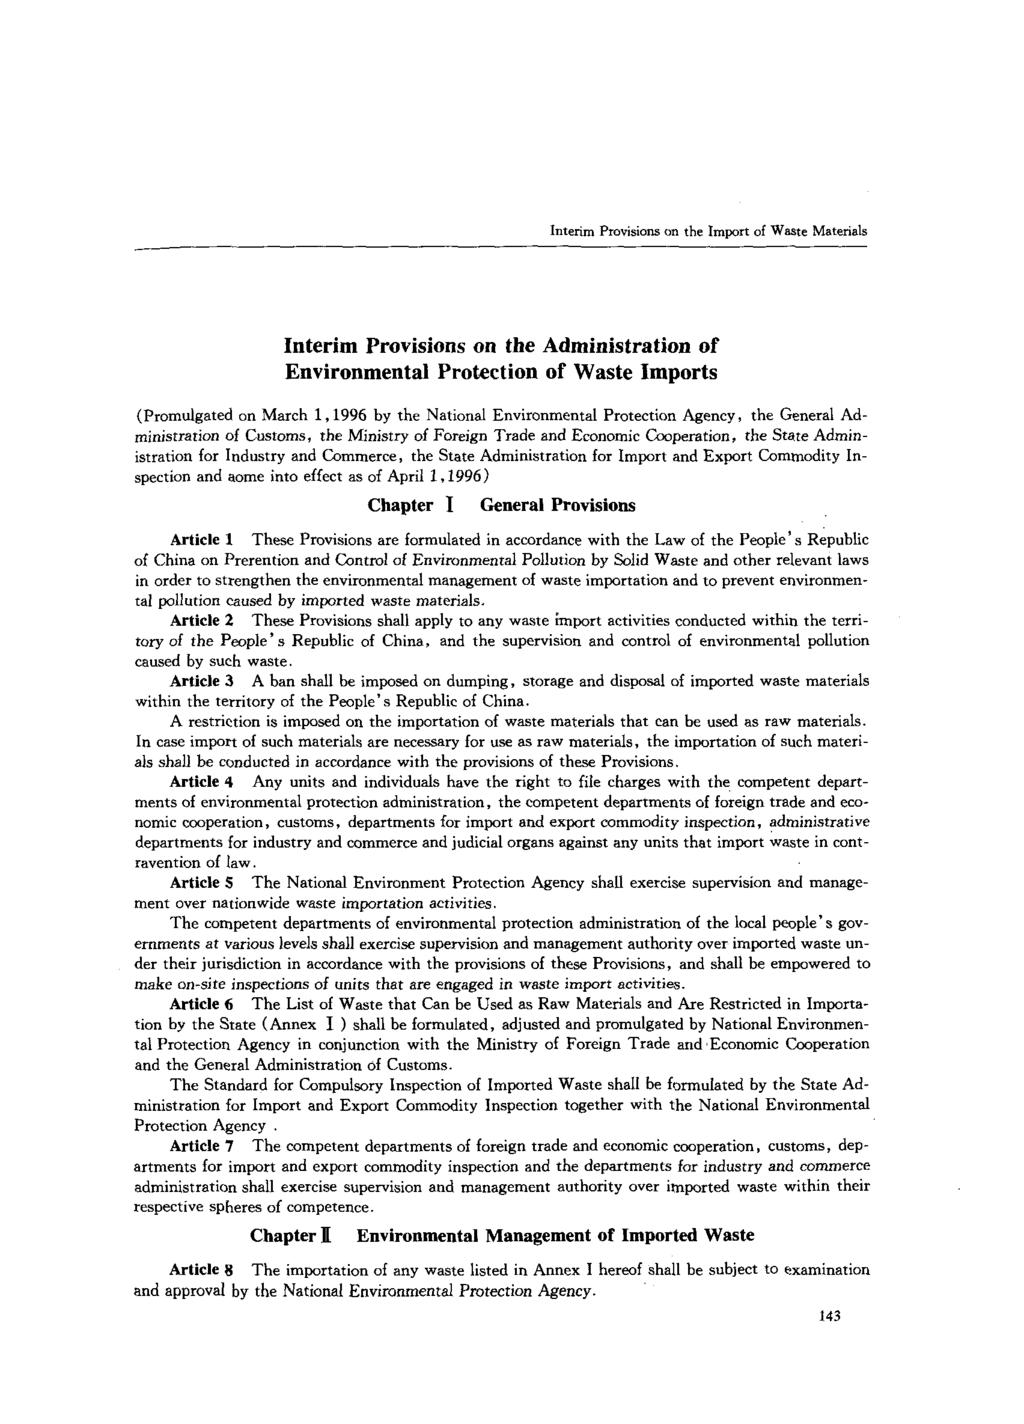 Interim Provisions on the Administration of Environmental Protection of Waste Imports (Promulgated on March 1,1996 by the National Environmental Protection Agency, the General Administration of